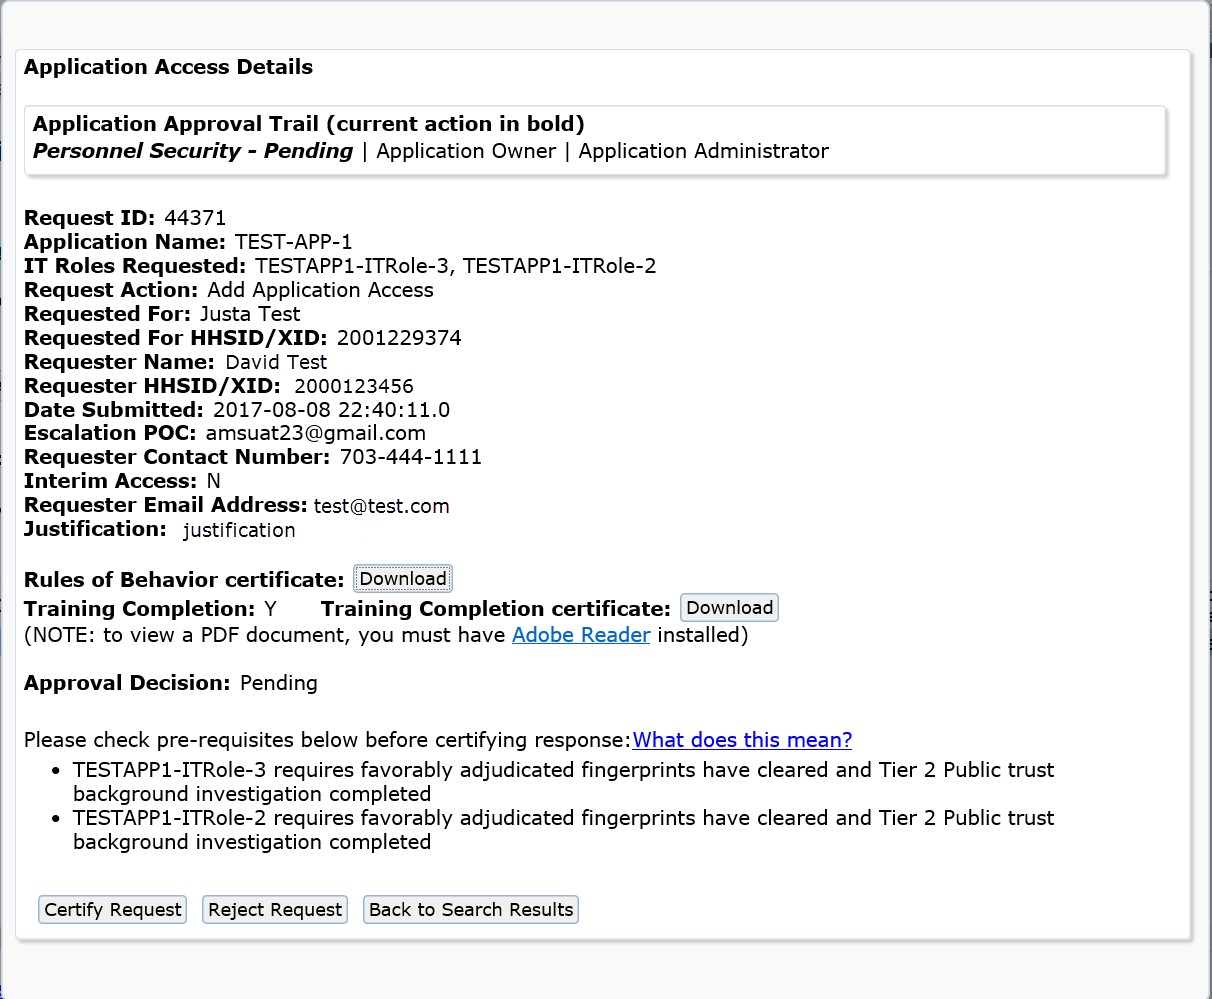 Application access details for the selected Request ID when viewed by a Personnel Security Administrator.